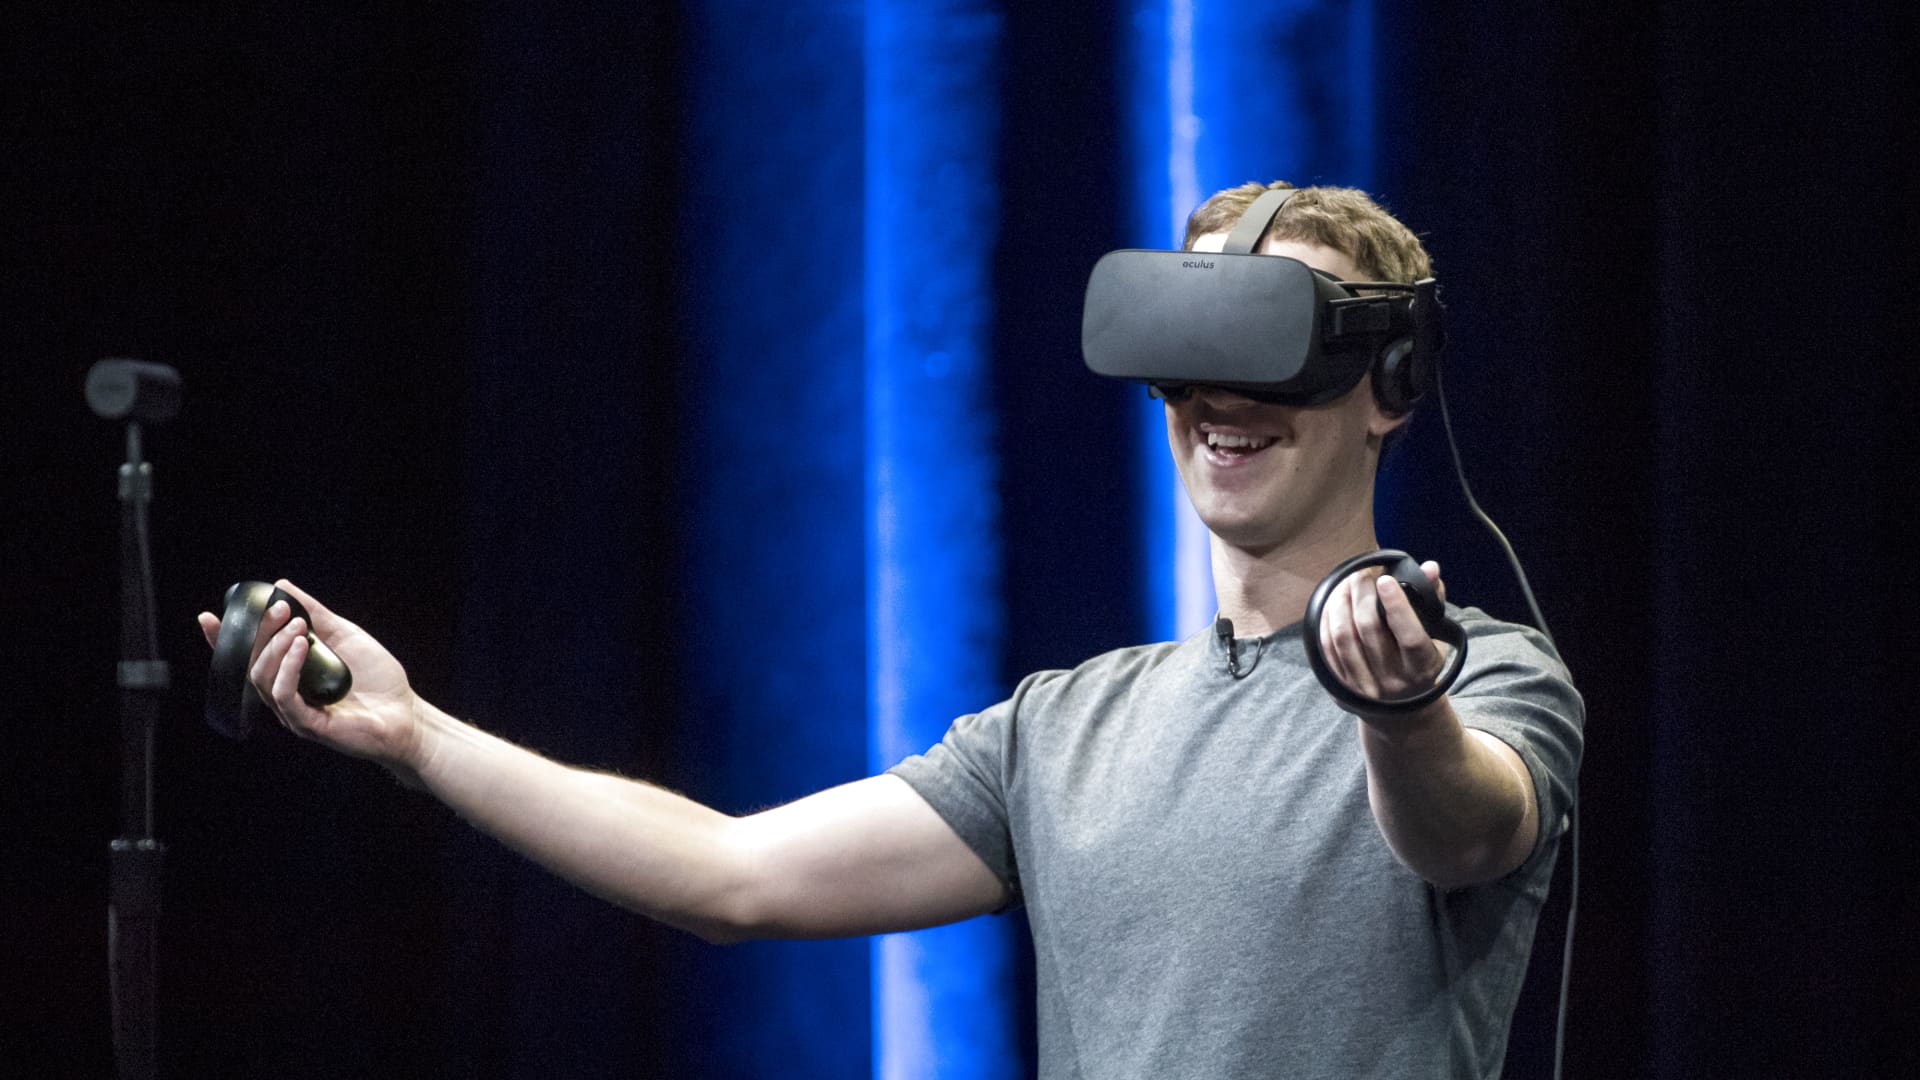 Zuckerberg announces event for Oct. 11 where new Meta headset expected